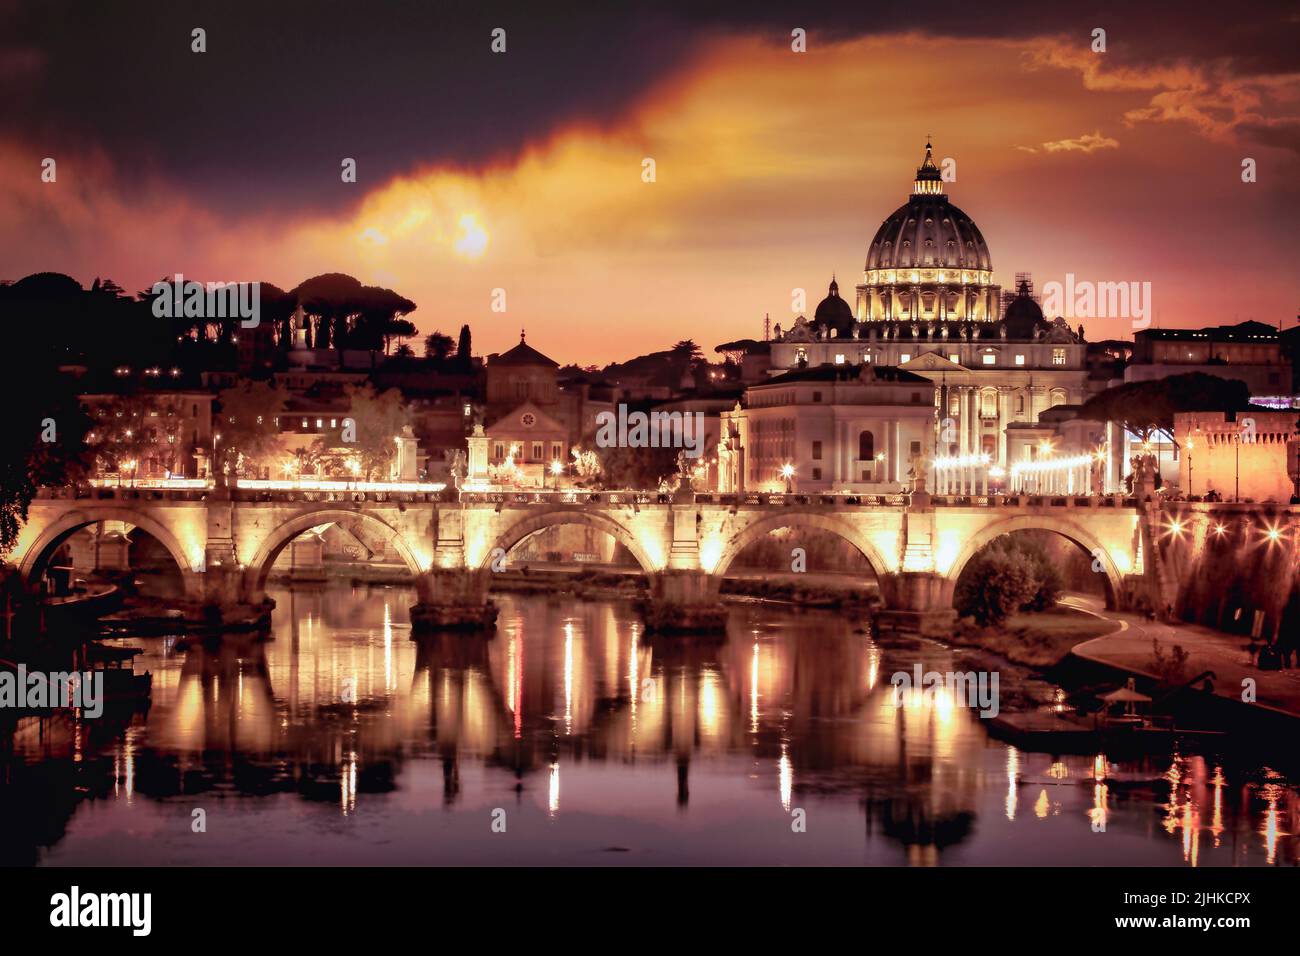 St. Peters Basilica rises above all along the banks of the Tiber River in Rome, Italy. Stock Photo